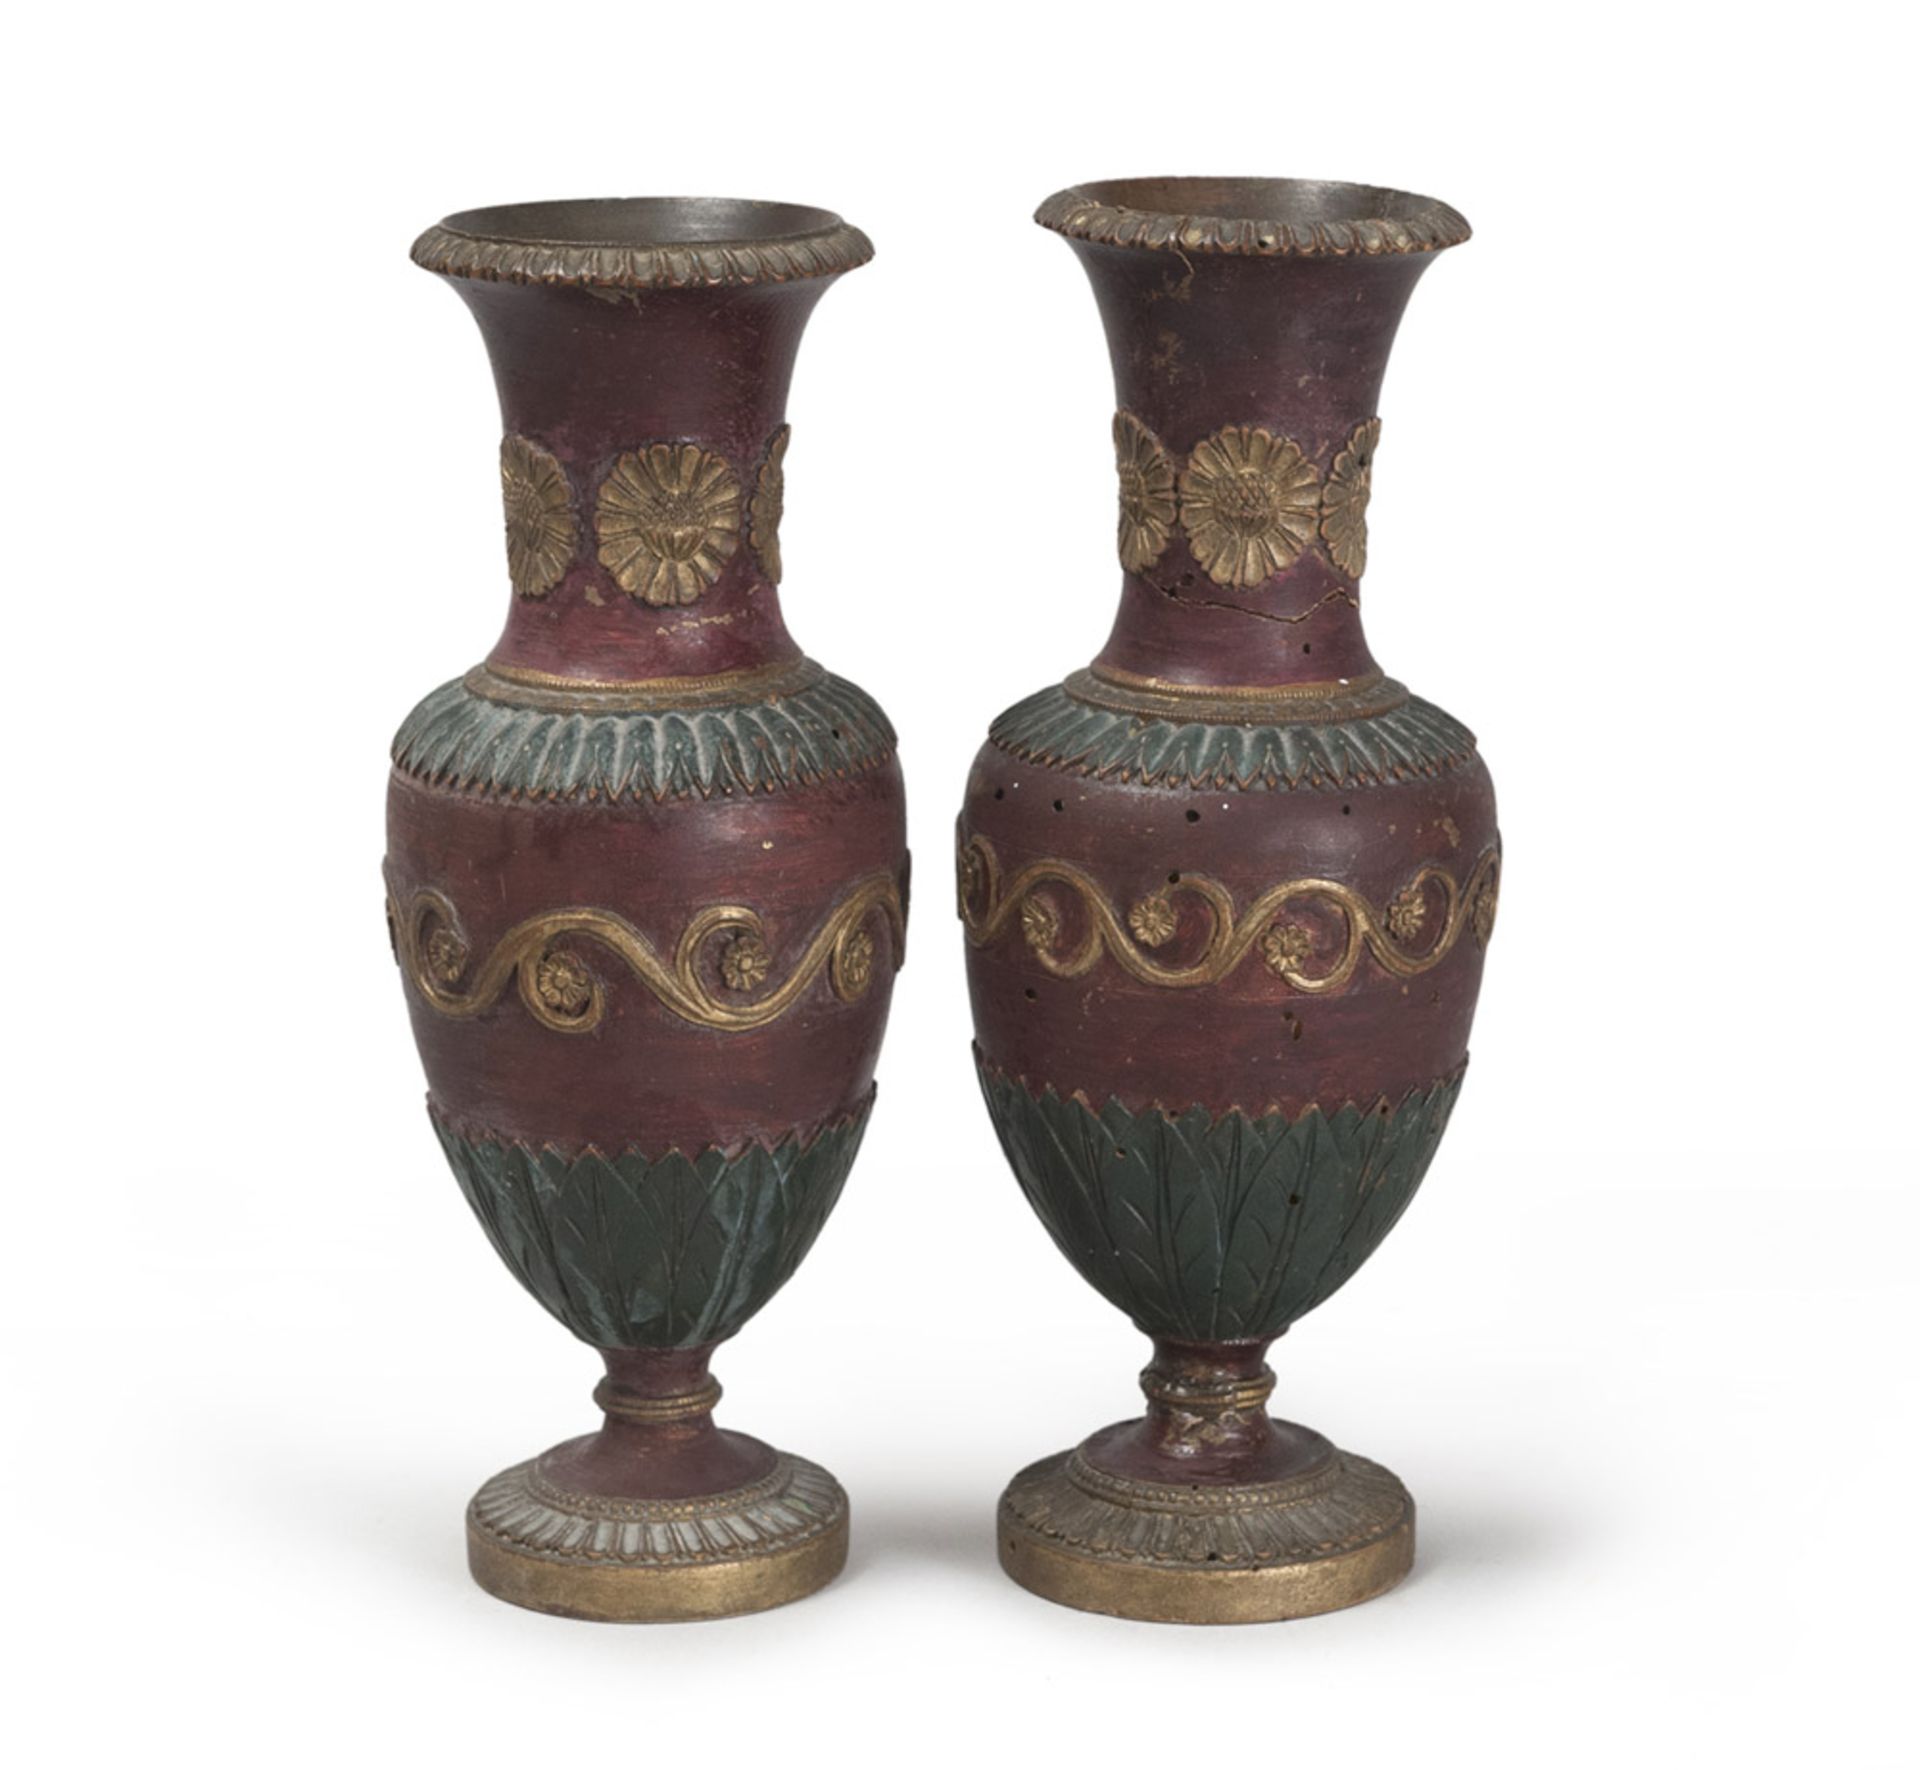 A pair of red, green and gold lacquer wood pots, Piedmont late period Luigi XVI. Measures cm. 23,5 x